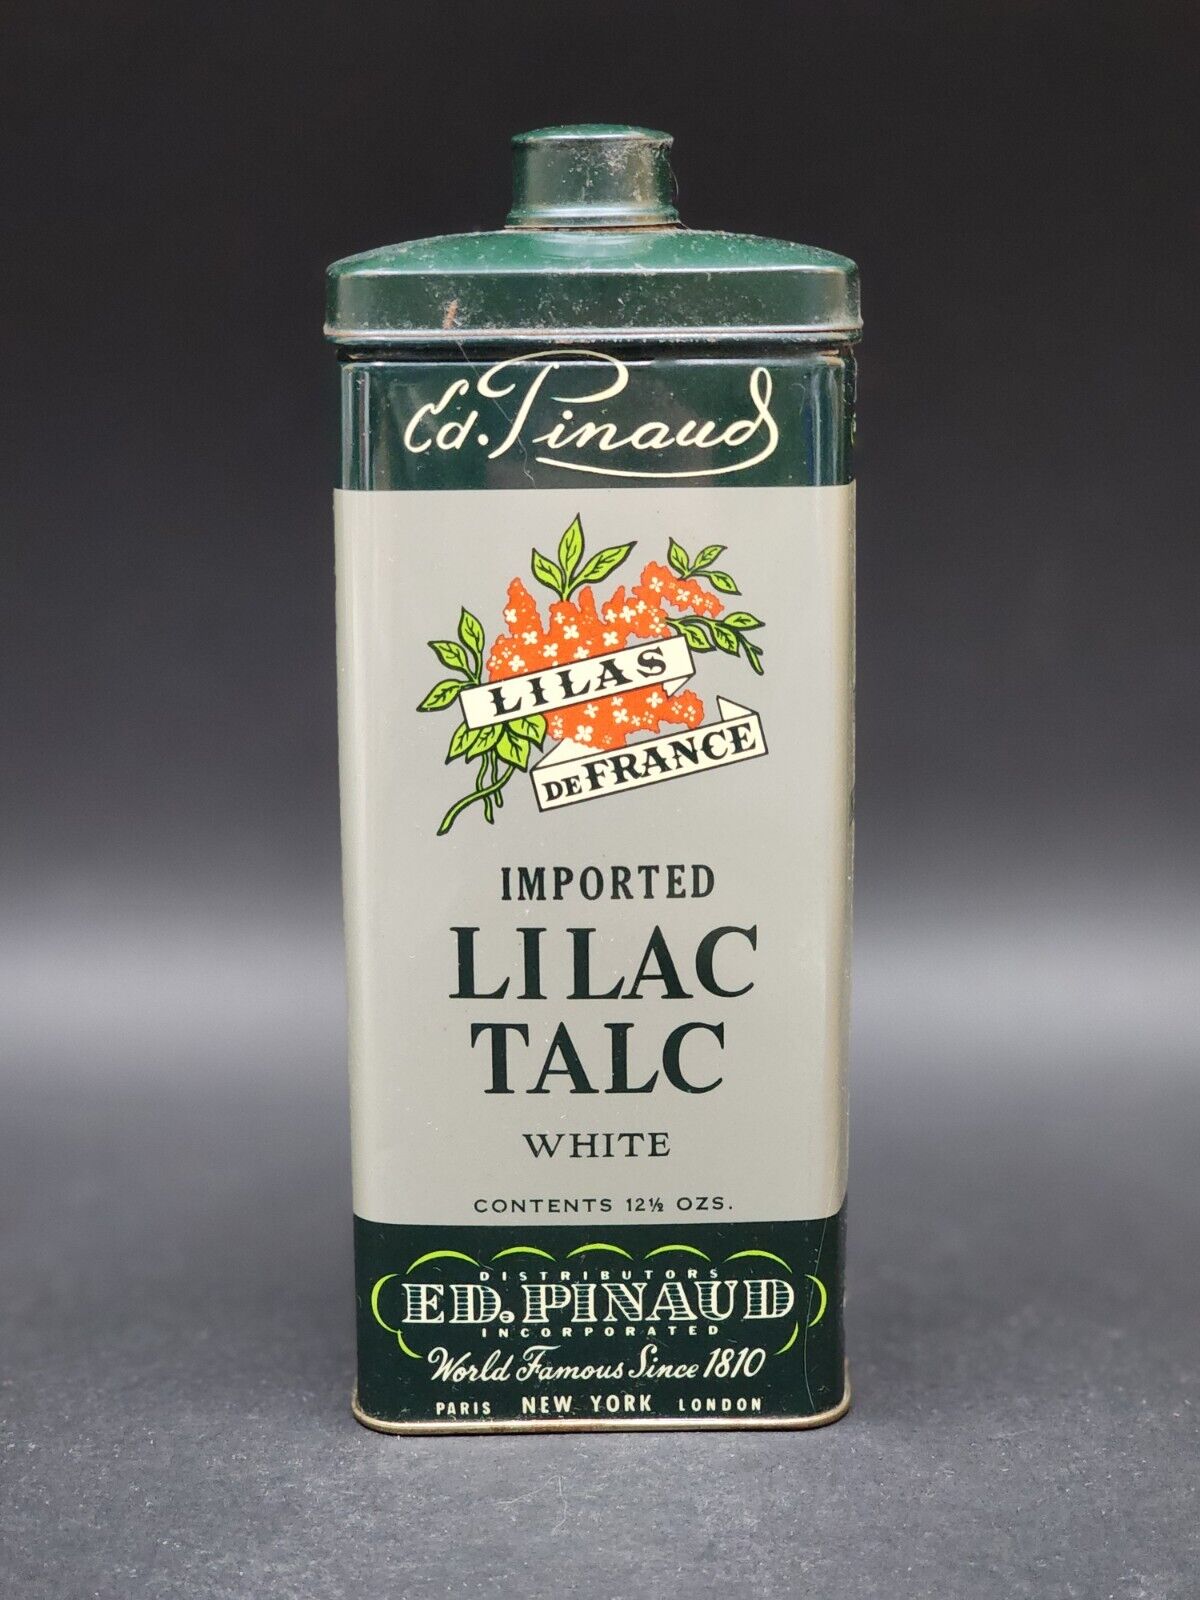 VINTAGE PINAUD LILAS DE FRANCE IMPORTED LILAC TALC ADVERTISING TIN 